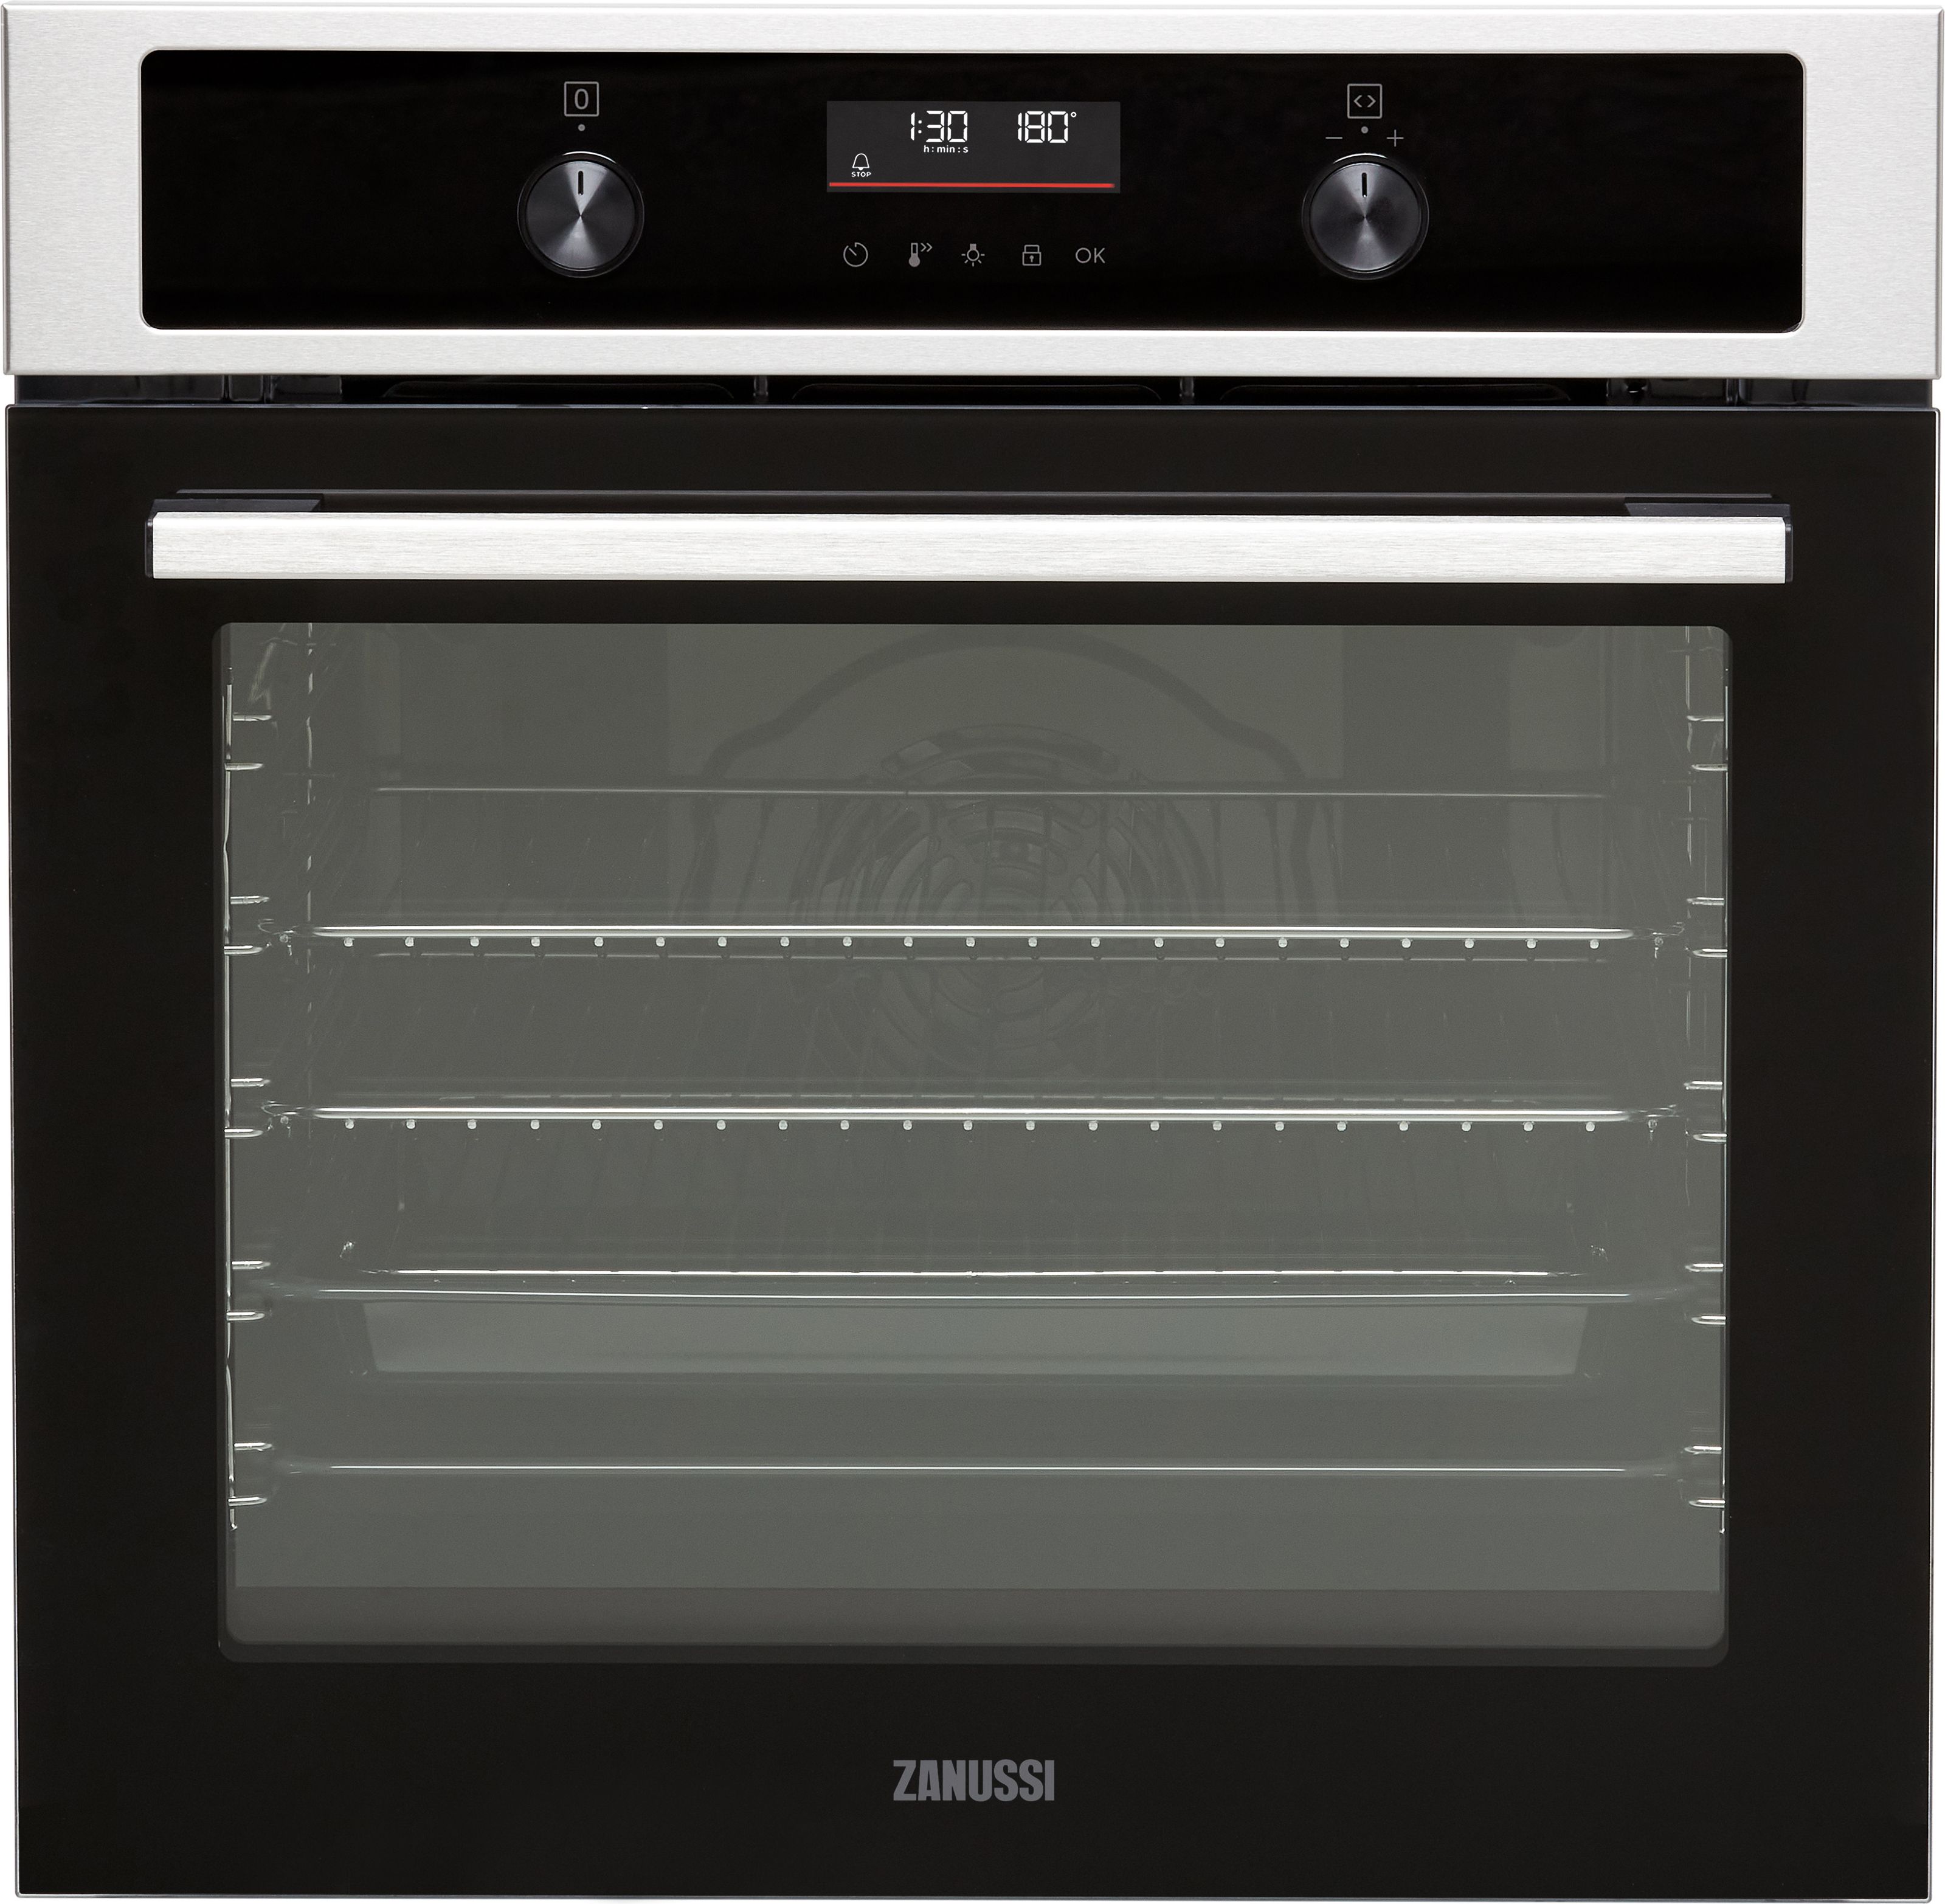 Zanussi ZOHNA7XN Built In Electric Single Oven - Stainless Steel / Black - A+ Rated, Stainless Steel